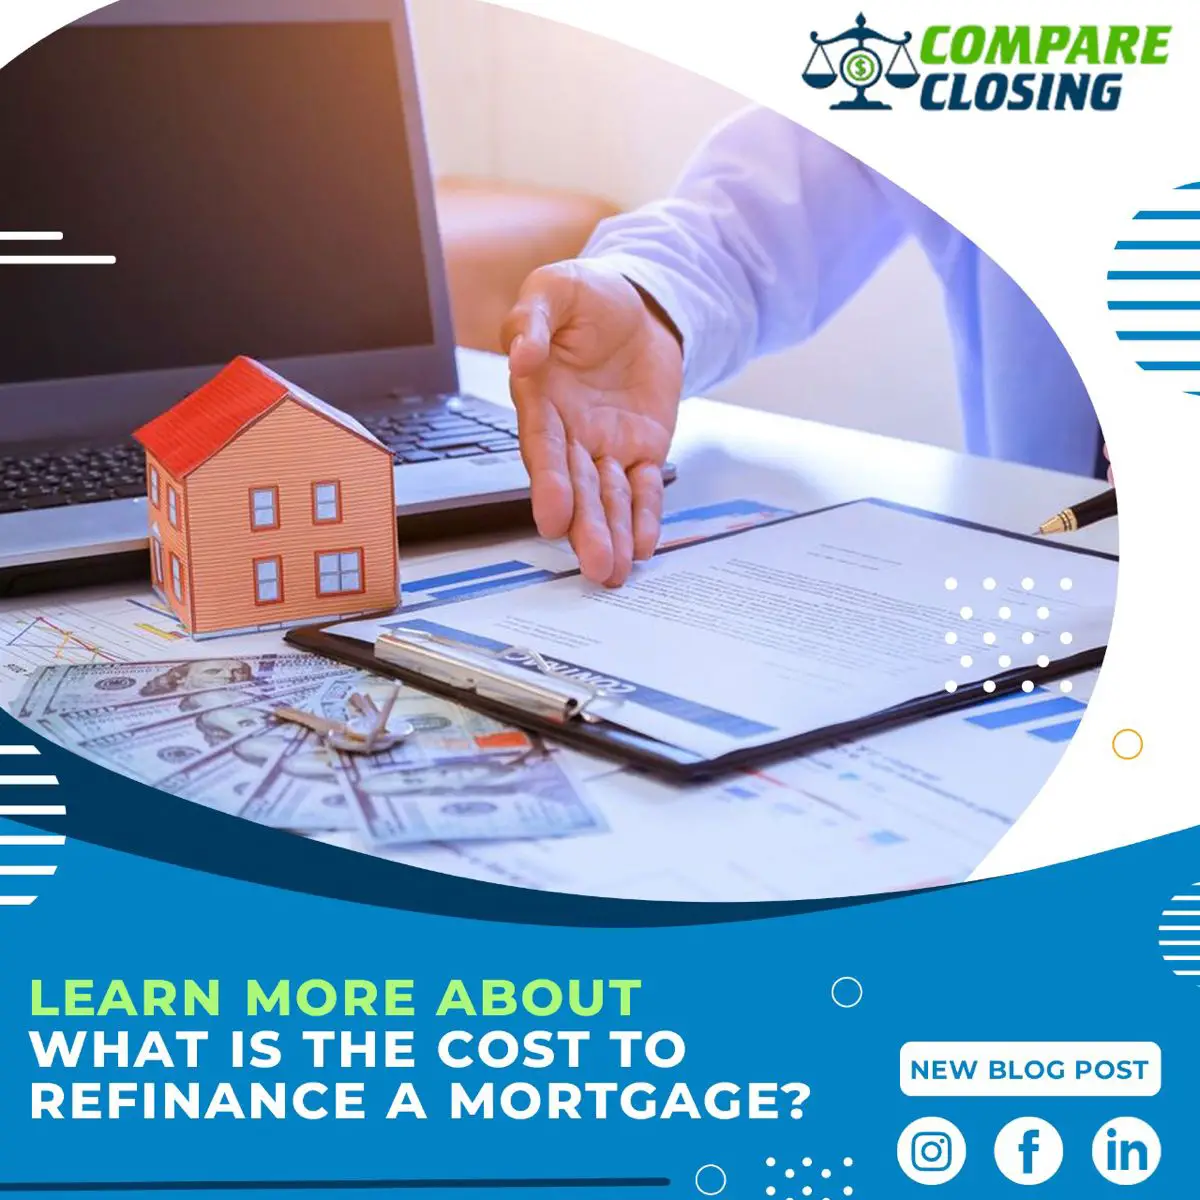 What Is The Cost To Refinance A Mortgage?